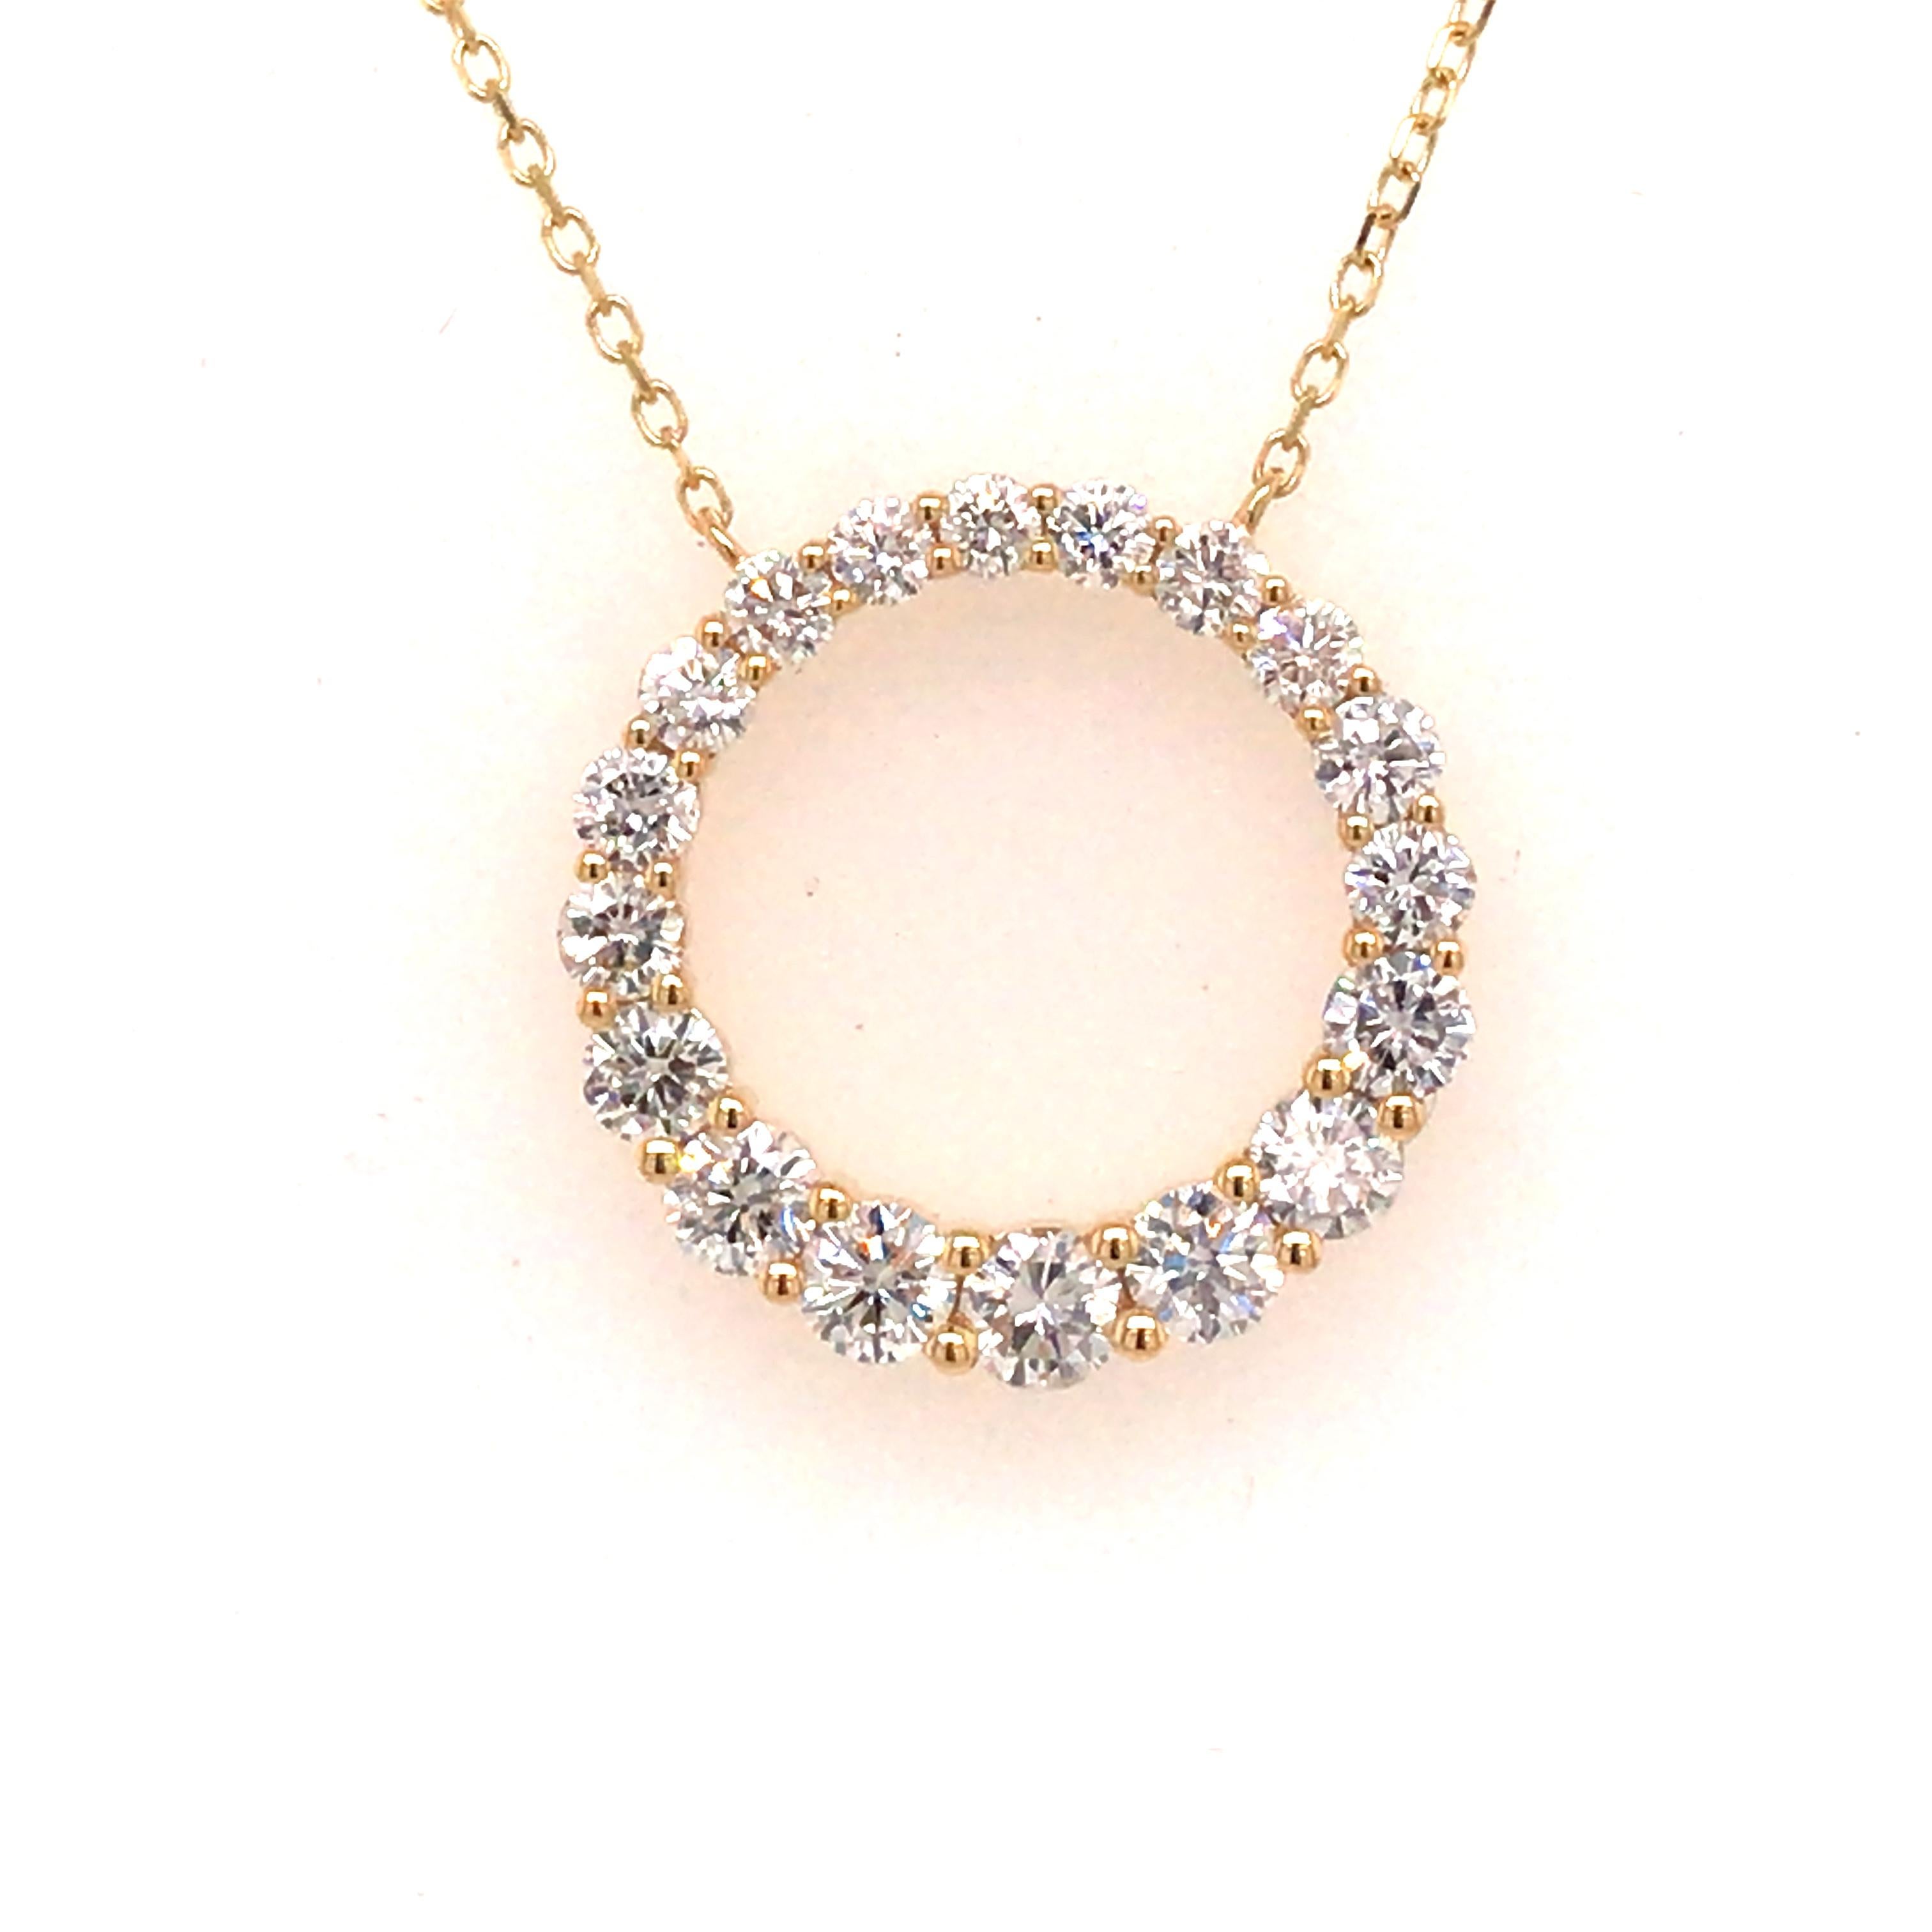 Diamond Circle Pendant in 18K Yellow Gold. (18) Round Brilliant Cut Diamonds weighing 0.88 carat total weight G-H in color and VS in clarity are expertly set. The Necklace measures 16 inch length. The Circle measures 5/8 inch in diameter. 2.95 grams.